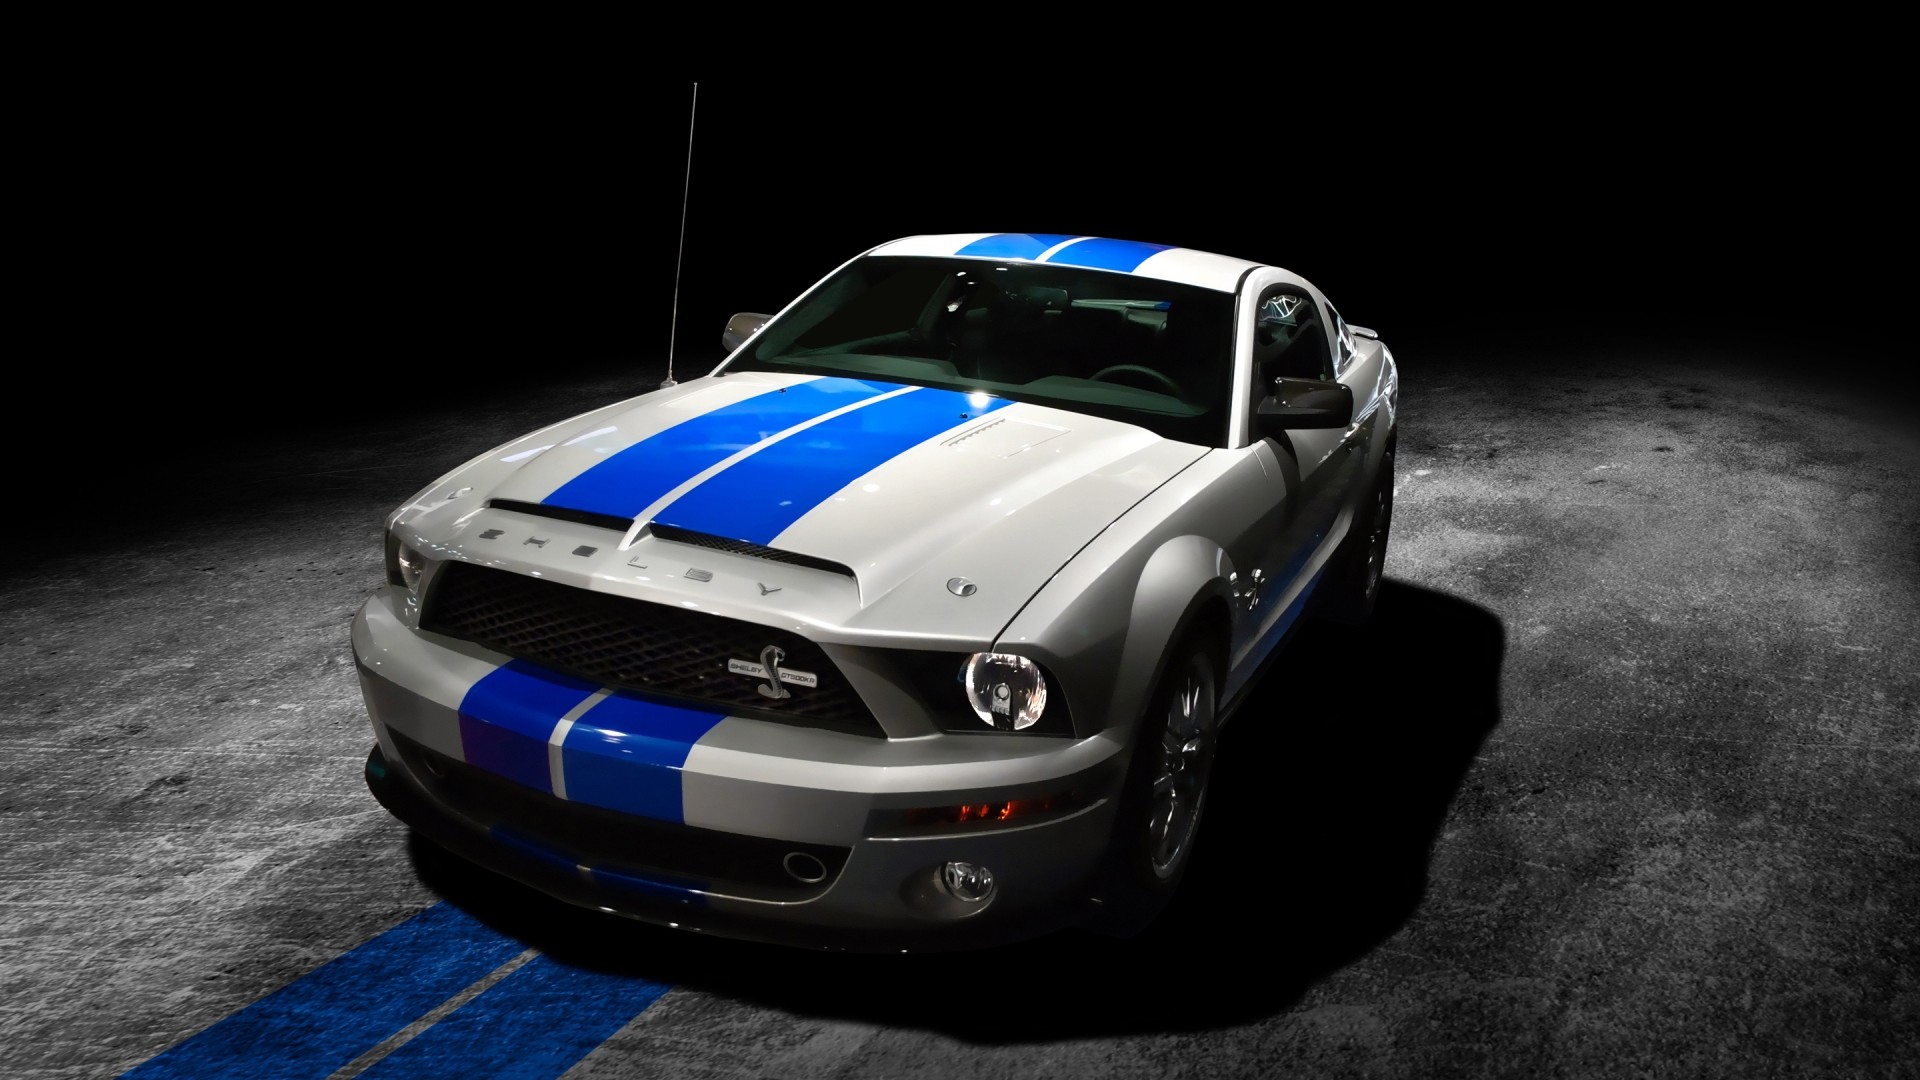 1920x1080 Ford Mustang Shelby GT500 HD Wallpaper | Background Image |  |  ID:473218 - Wallpaper Abyss